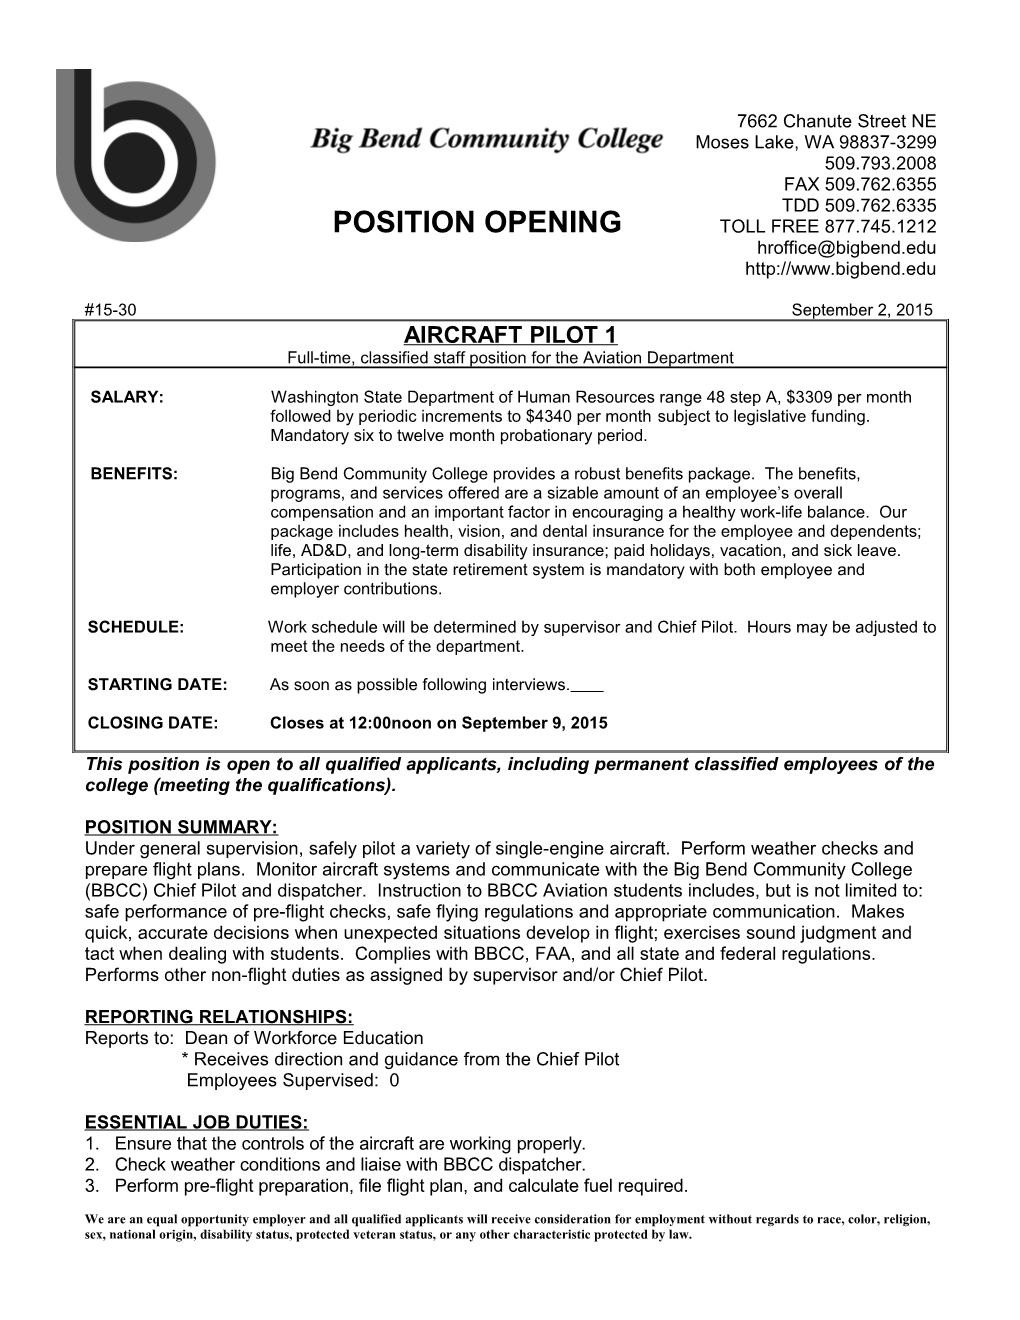 Full-Time, Classified Staff Position for the Aviation Department